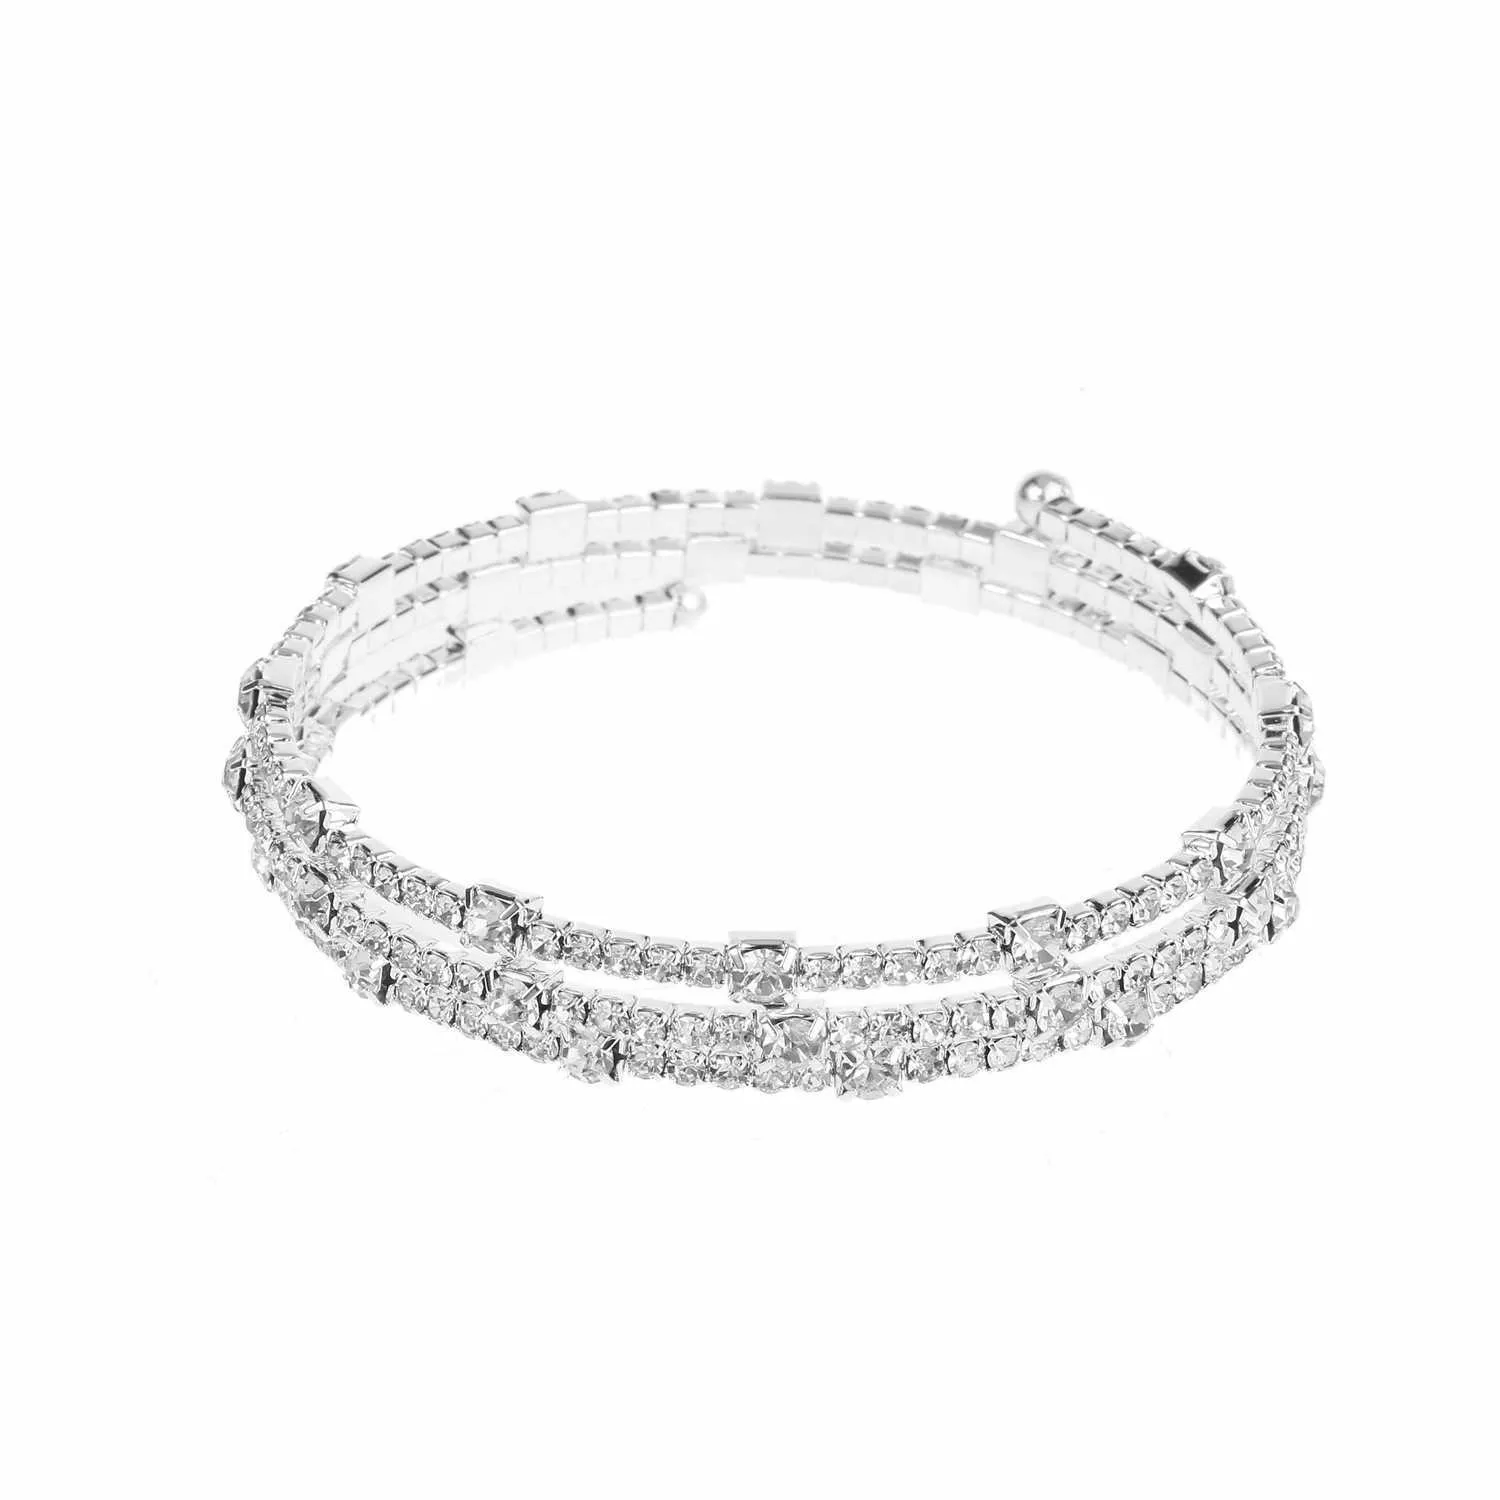 Three Rows Rhinestone Inlaid Bracelet Double Layers Open Cuff Adjustable Stretch Bracelet for Best Friends Sisters Fs99 Q0719